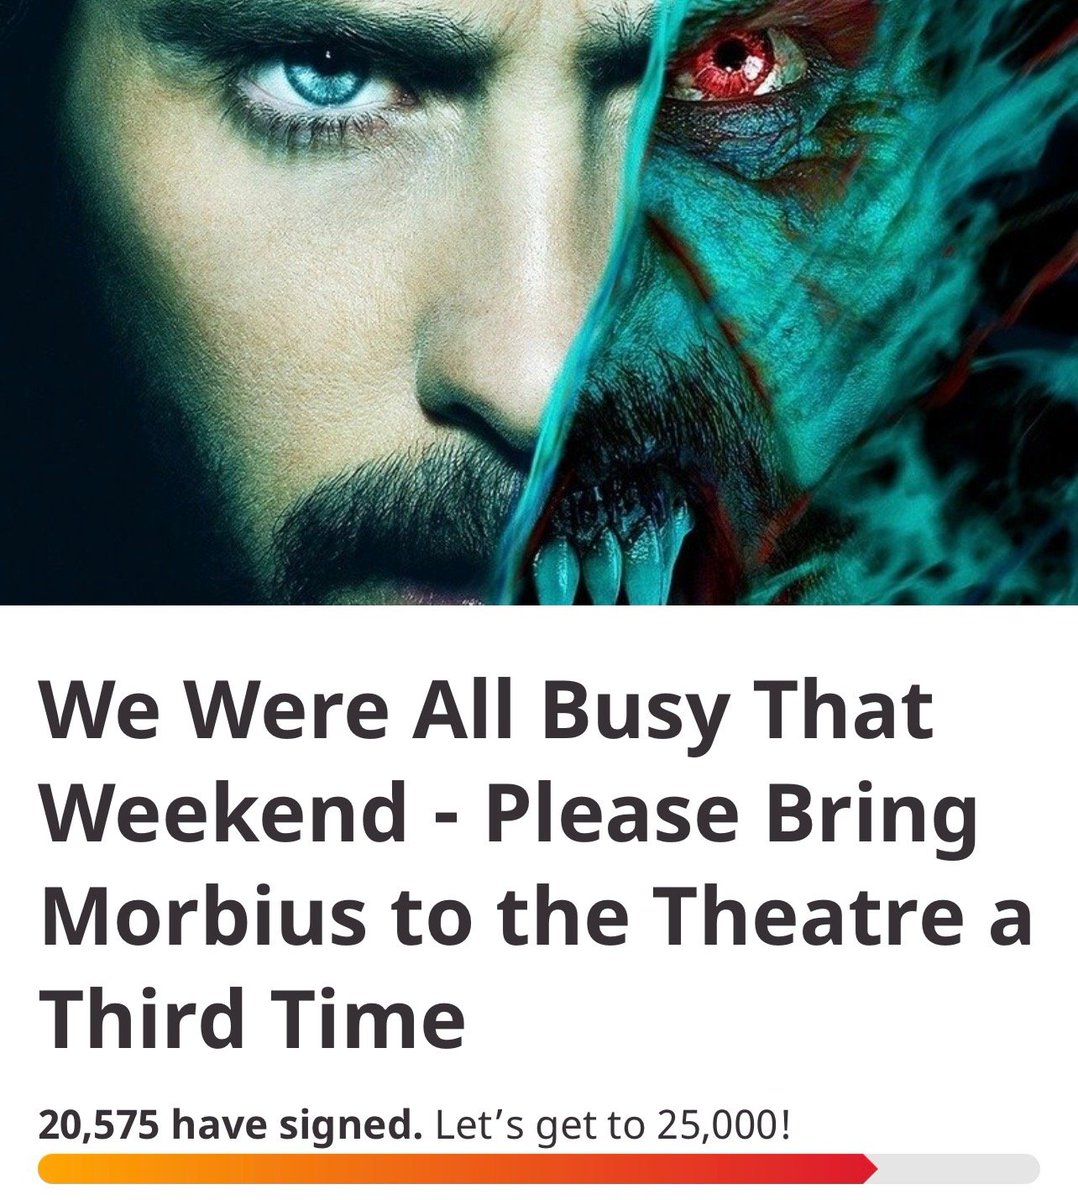 A petition to get #Morbius back in theaters for a third time crossed 20K signatures

'We were all busy that weekend' 😂